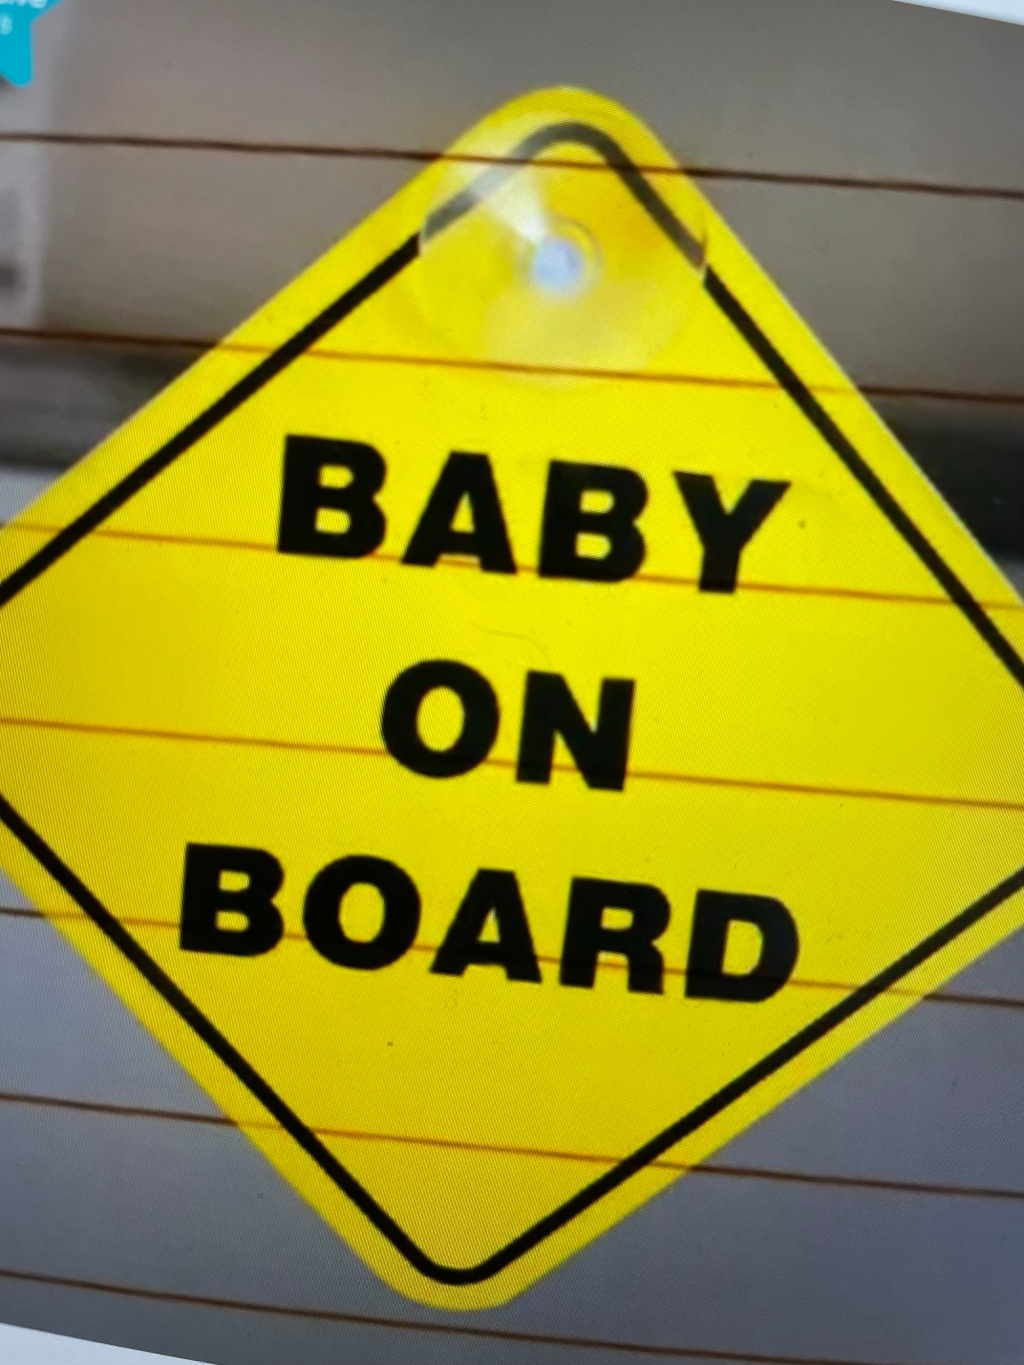 #baby_on_board